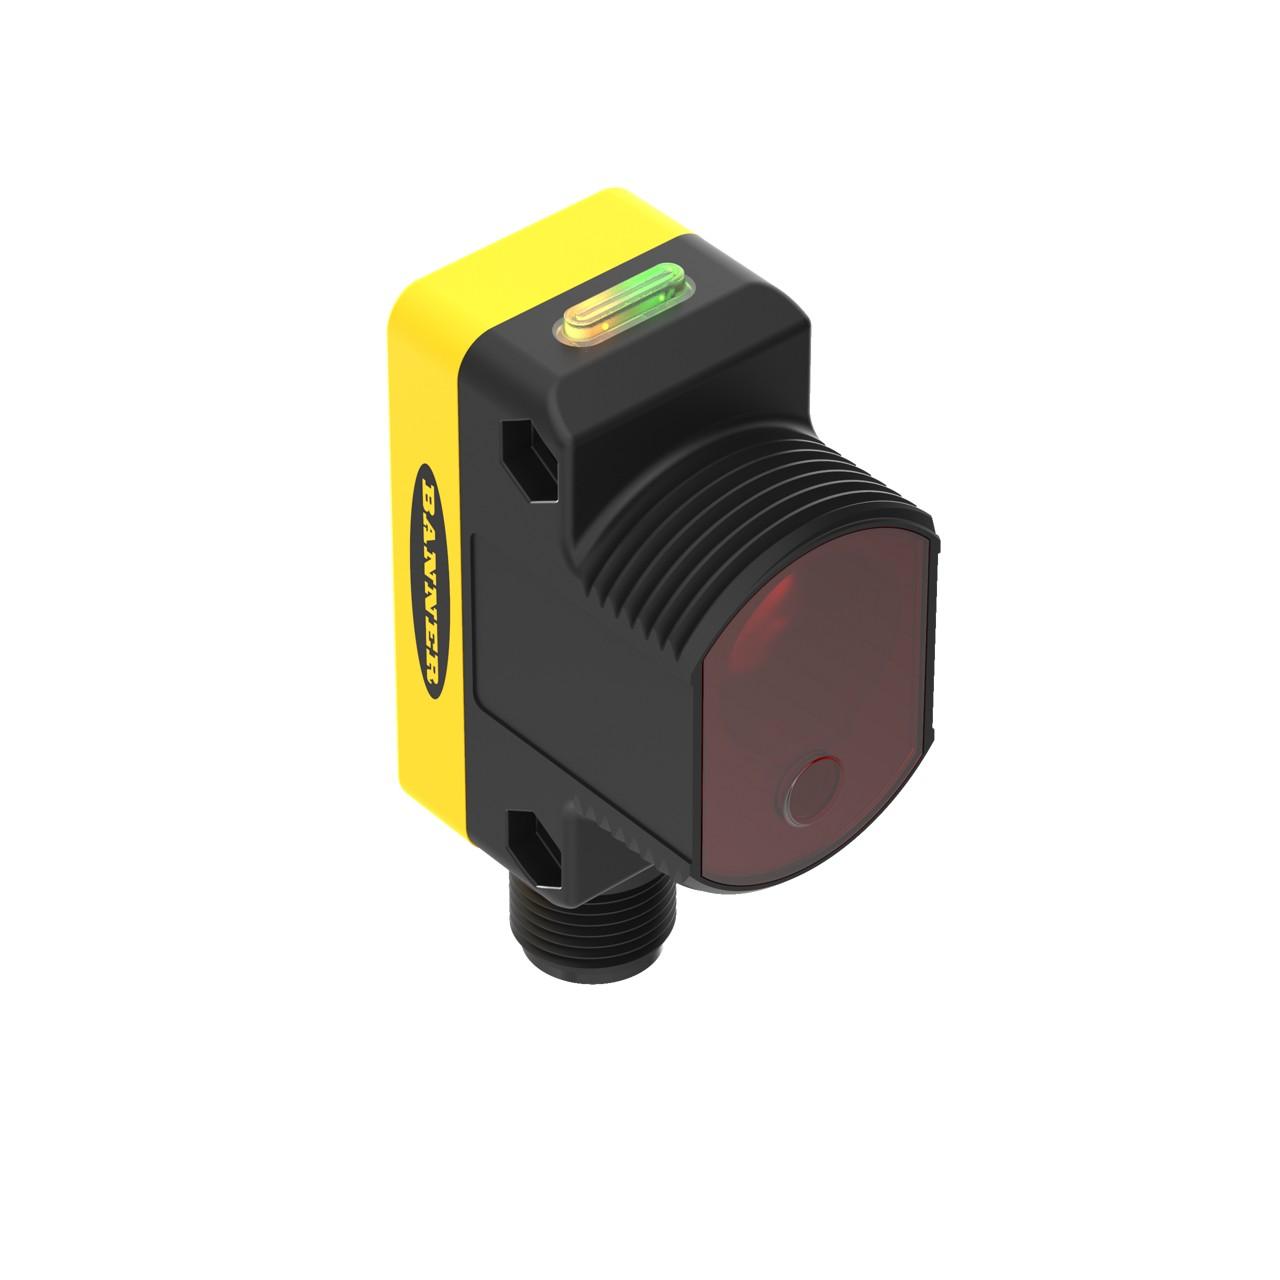 Banner QS30LDQ Class 1 Laser photo-electric sensor with diffuse mode - Banner Engineering (WORLD-BEAM series - QS30 Diffuse-mode Laser sensors series) - Part #70231 - Sensing range 400mm - Visible red light (650nm) - 1 x digital output (PNP/NPN transistor) (Light-ON or 